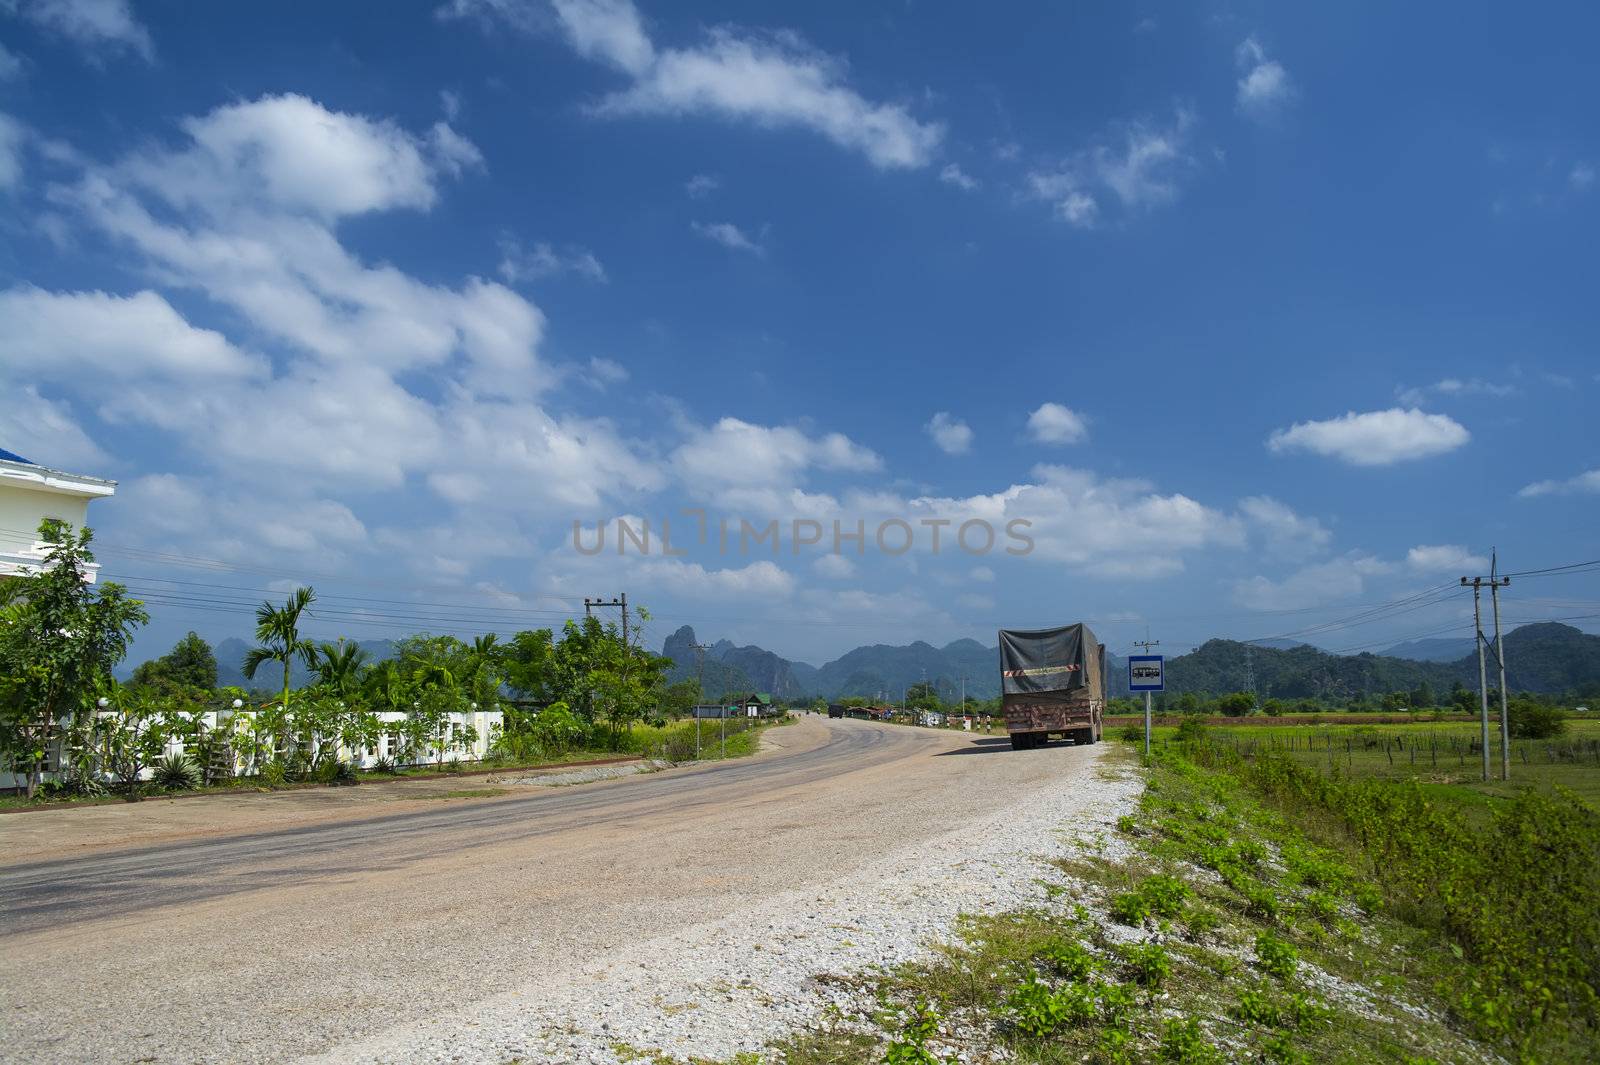 The road Laos. by GNNick